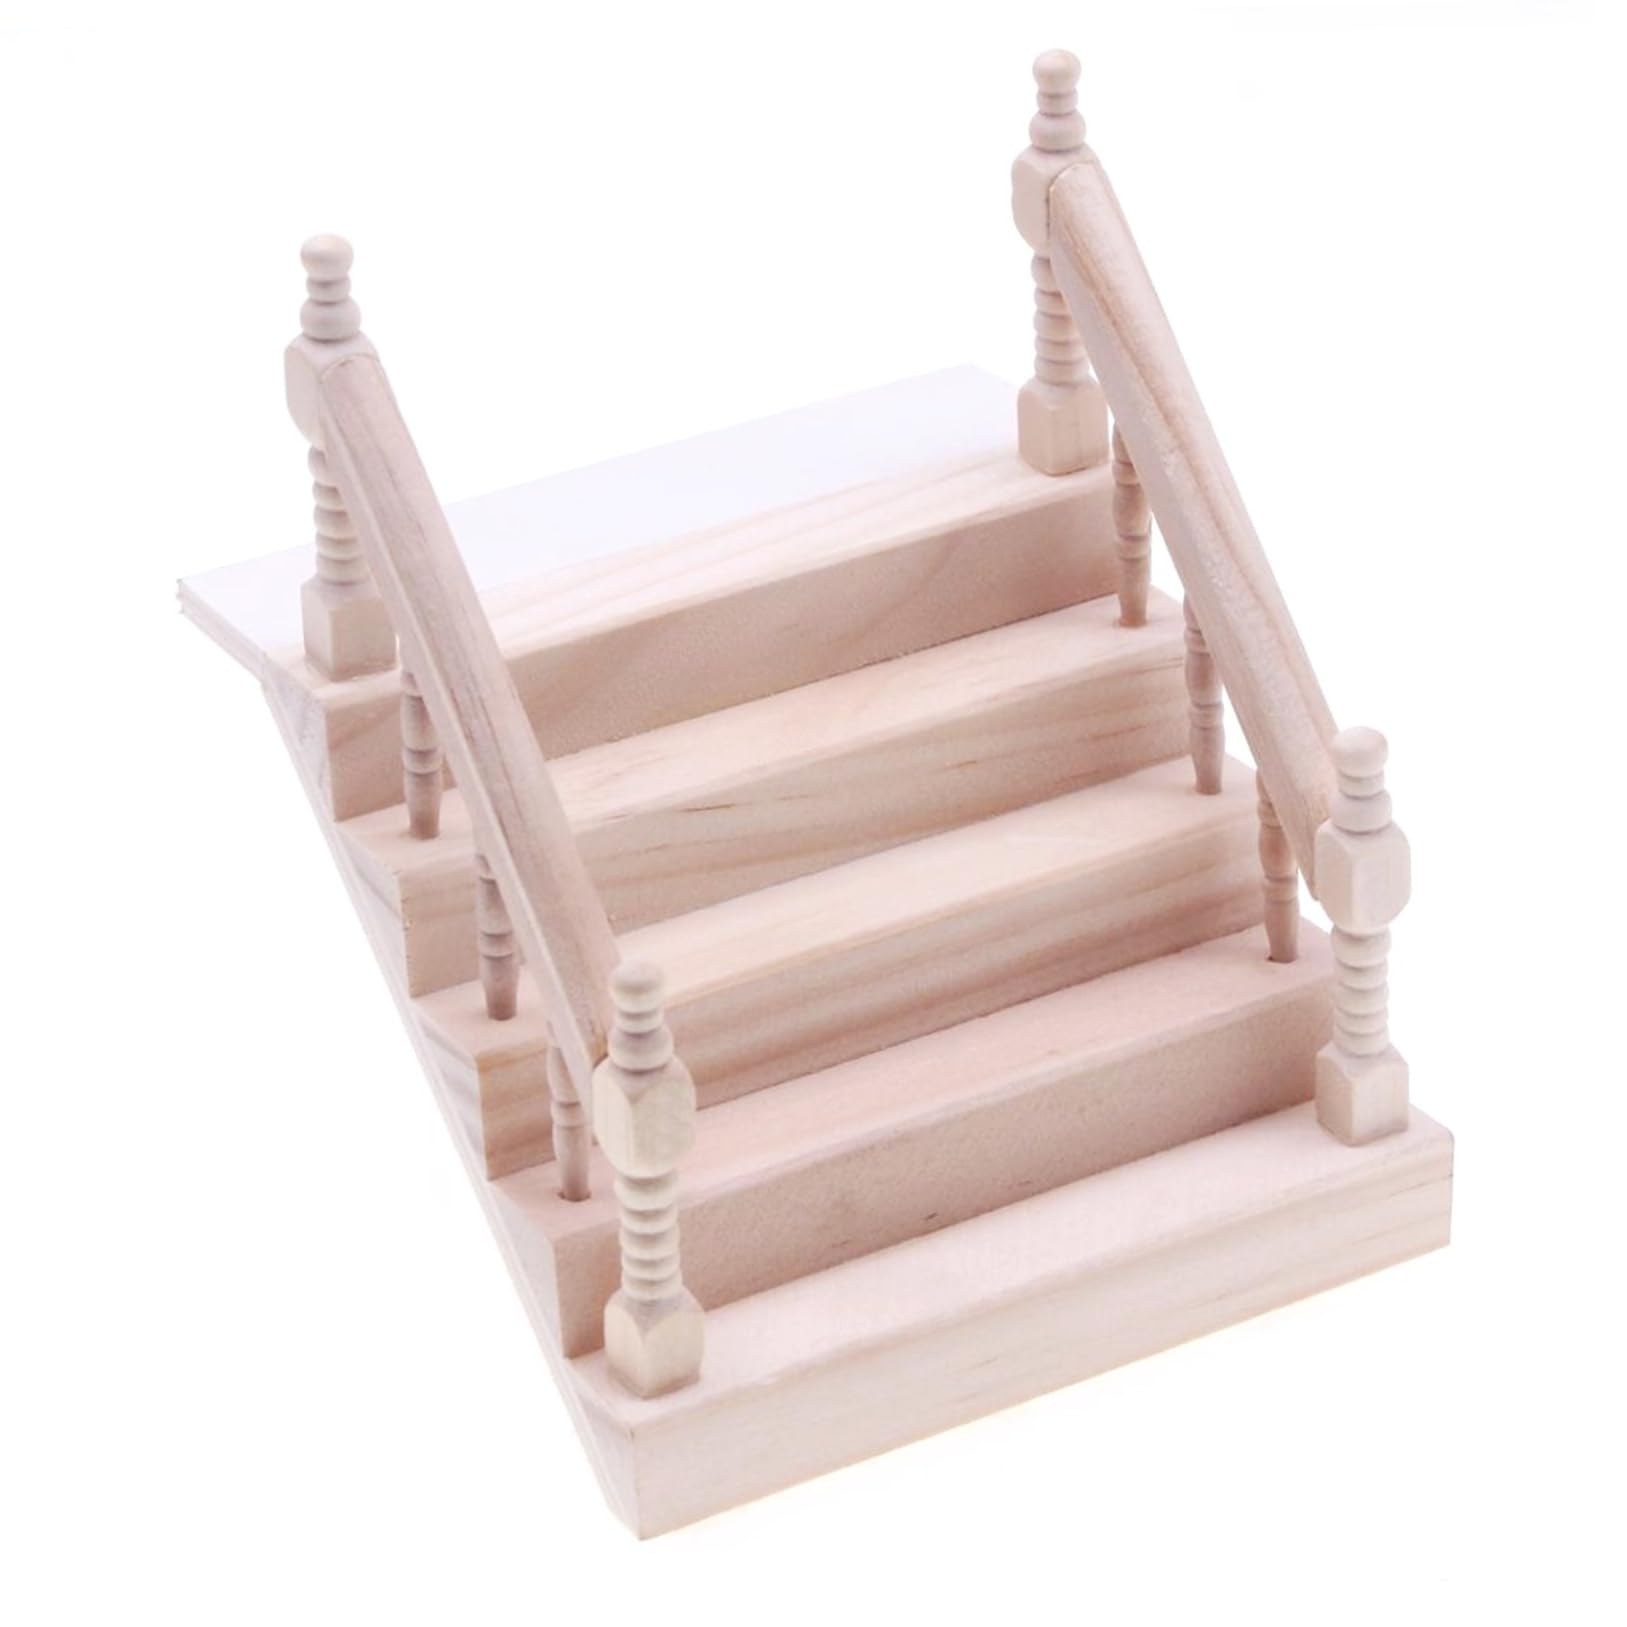 Dollhouse Staircase Wood Dollhouse Stairs 1:12 Scale Doll House Accessories with Handrail DIY Unpainted Mini Dollhouse Furniture for Fairy Garden Doll House Scene